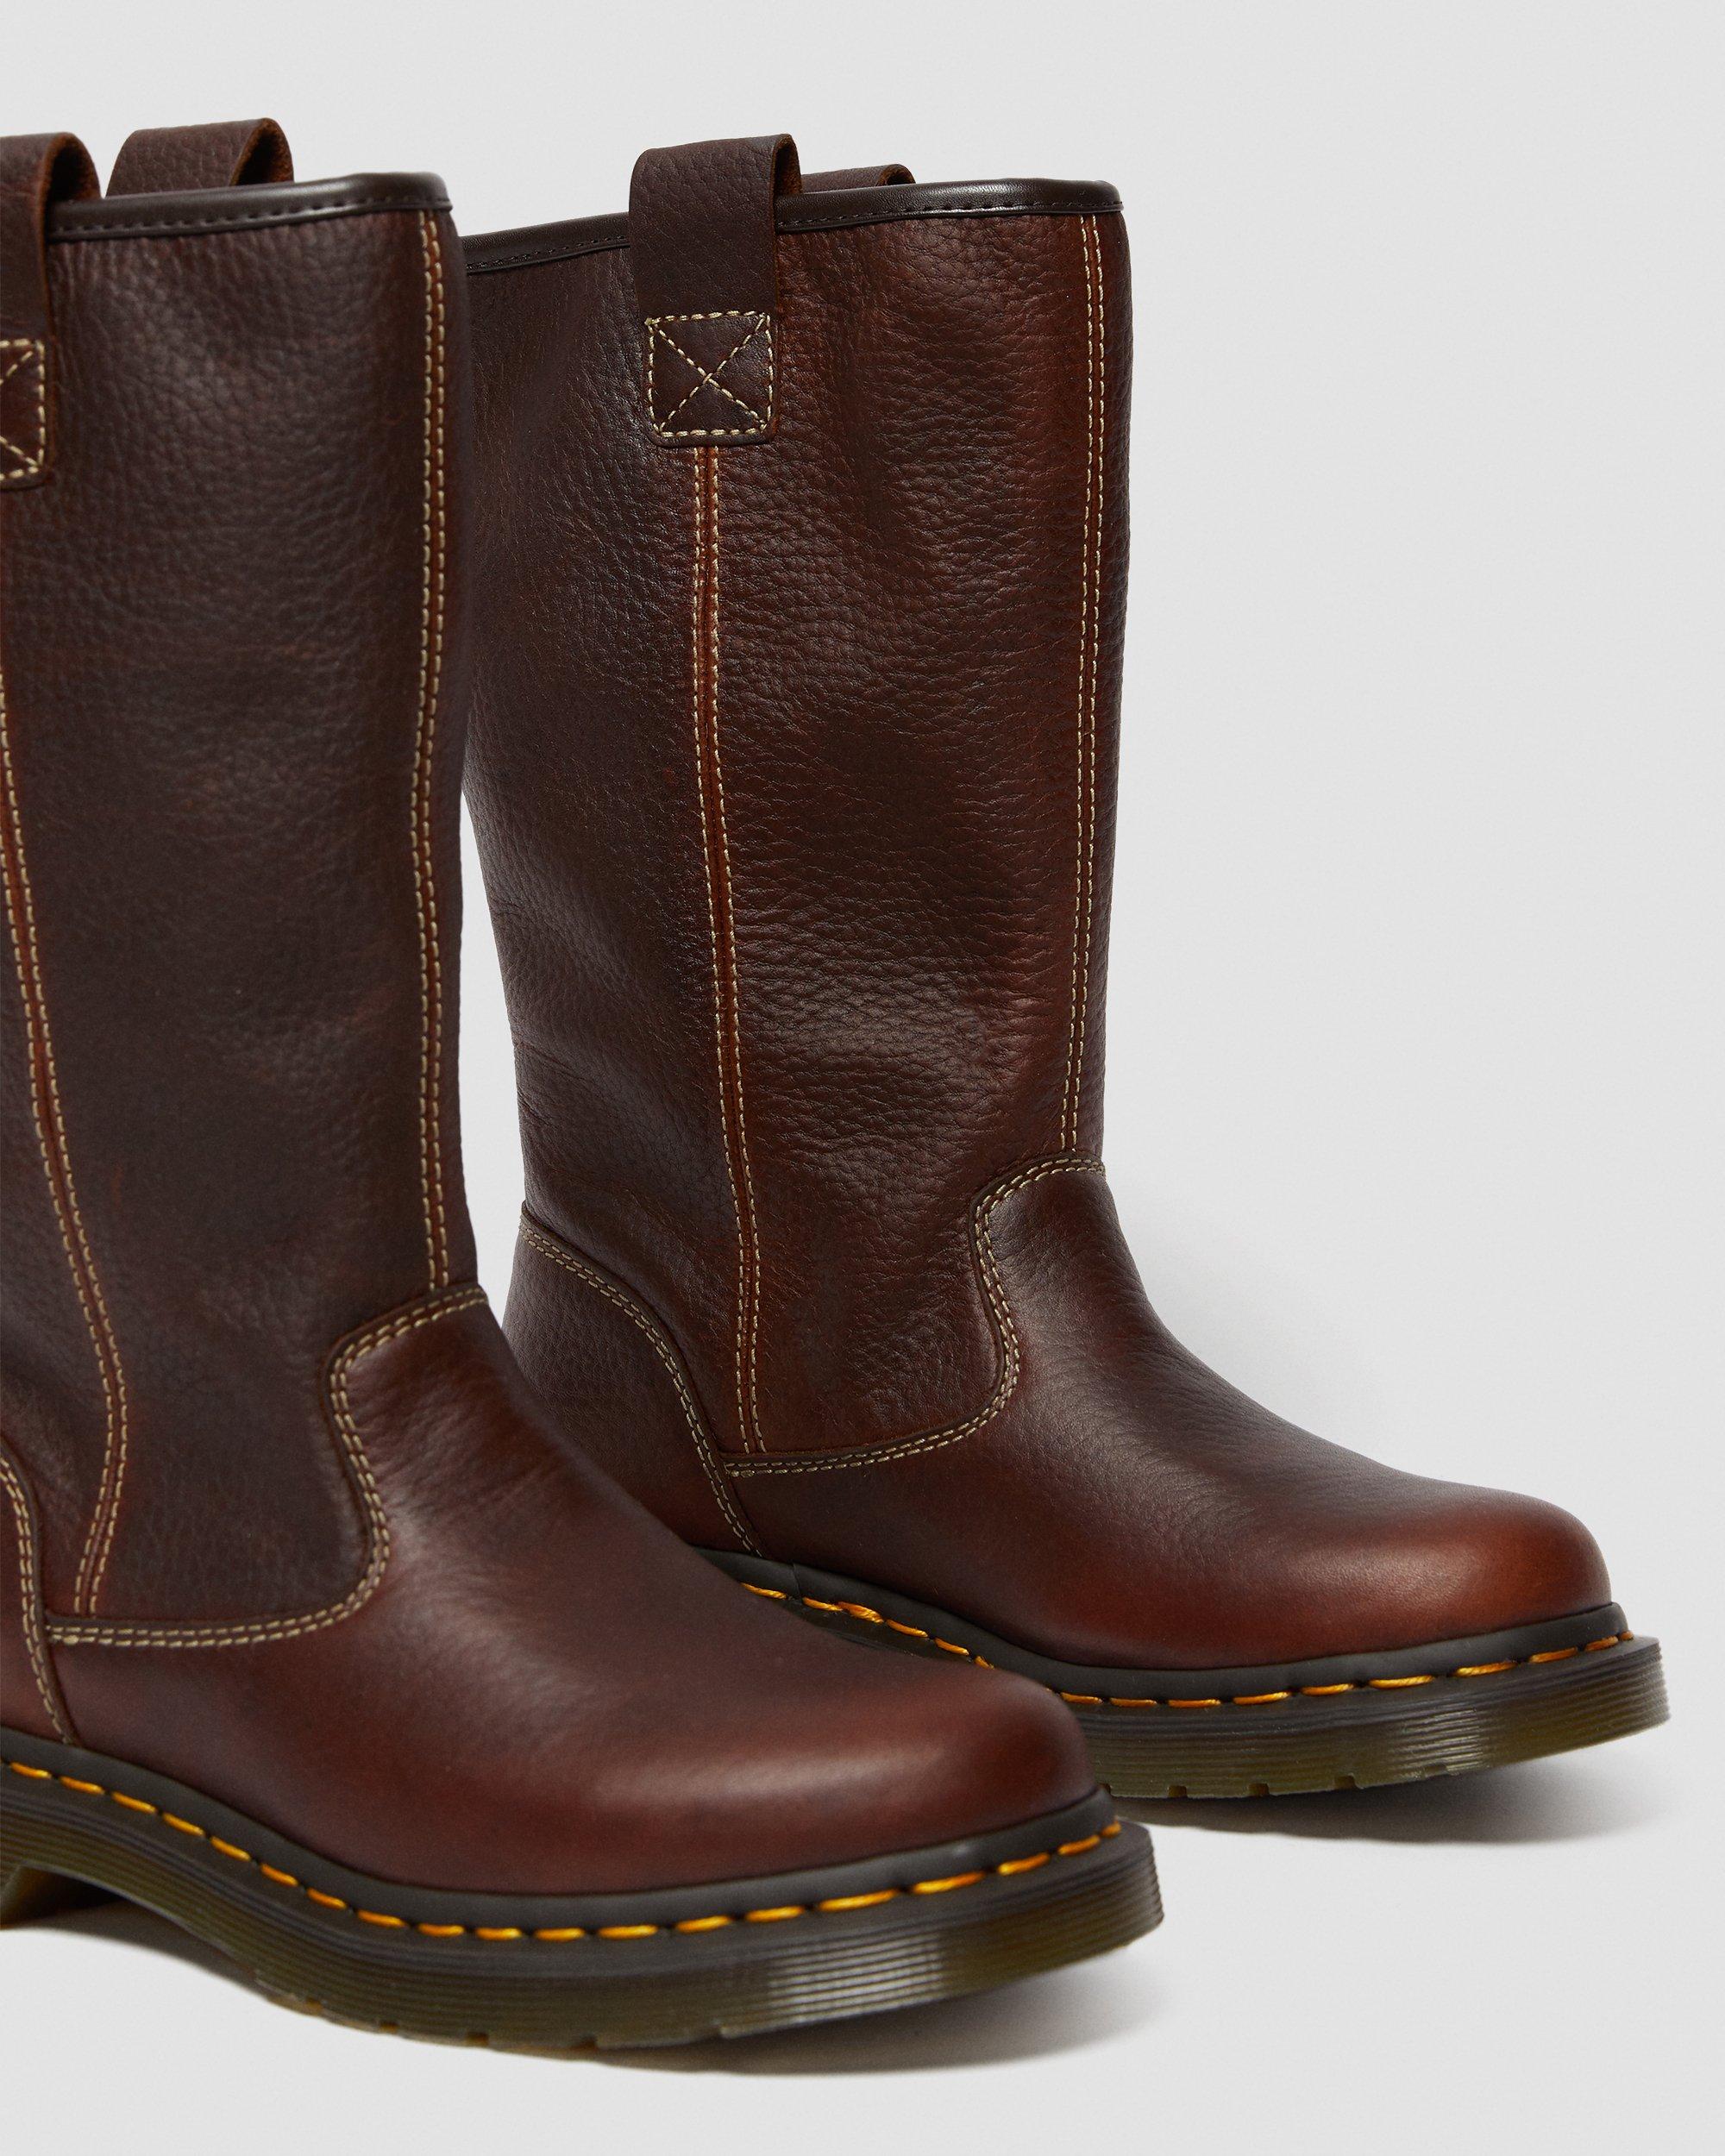 Belsay Women's Pull On Work Boots | Dr. Martens